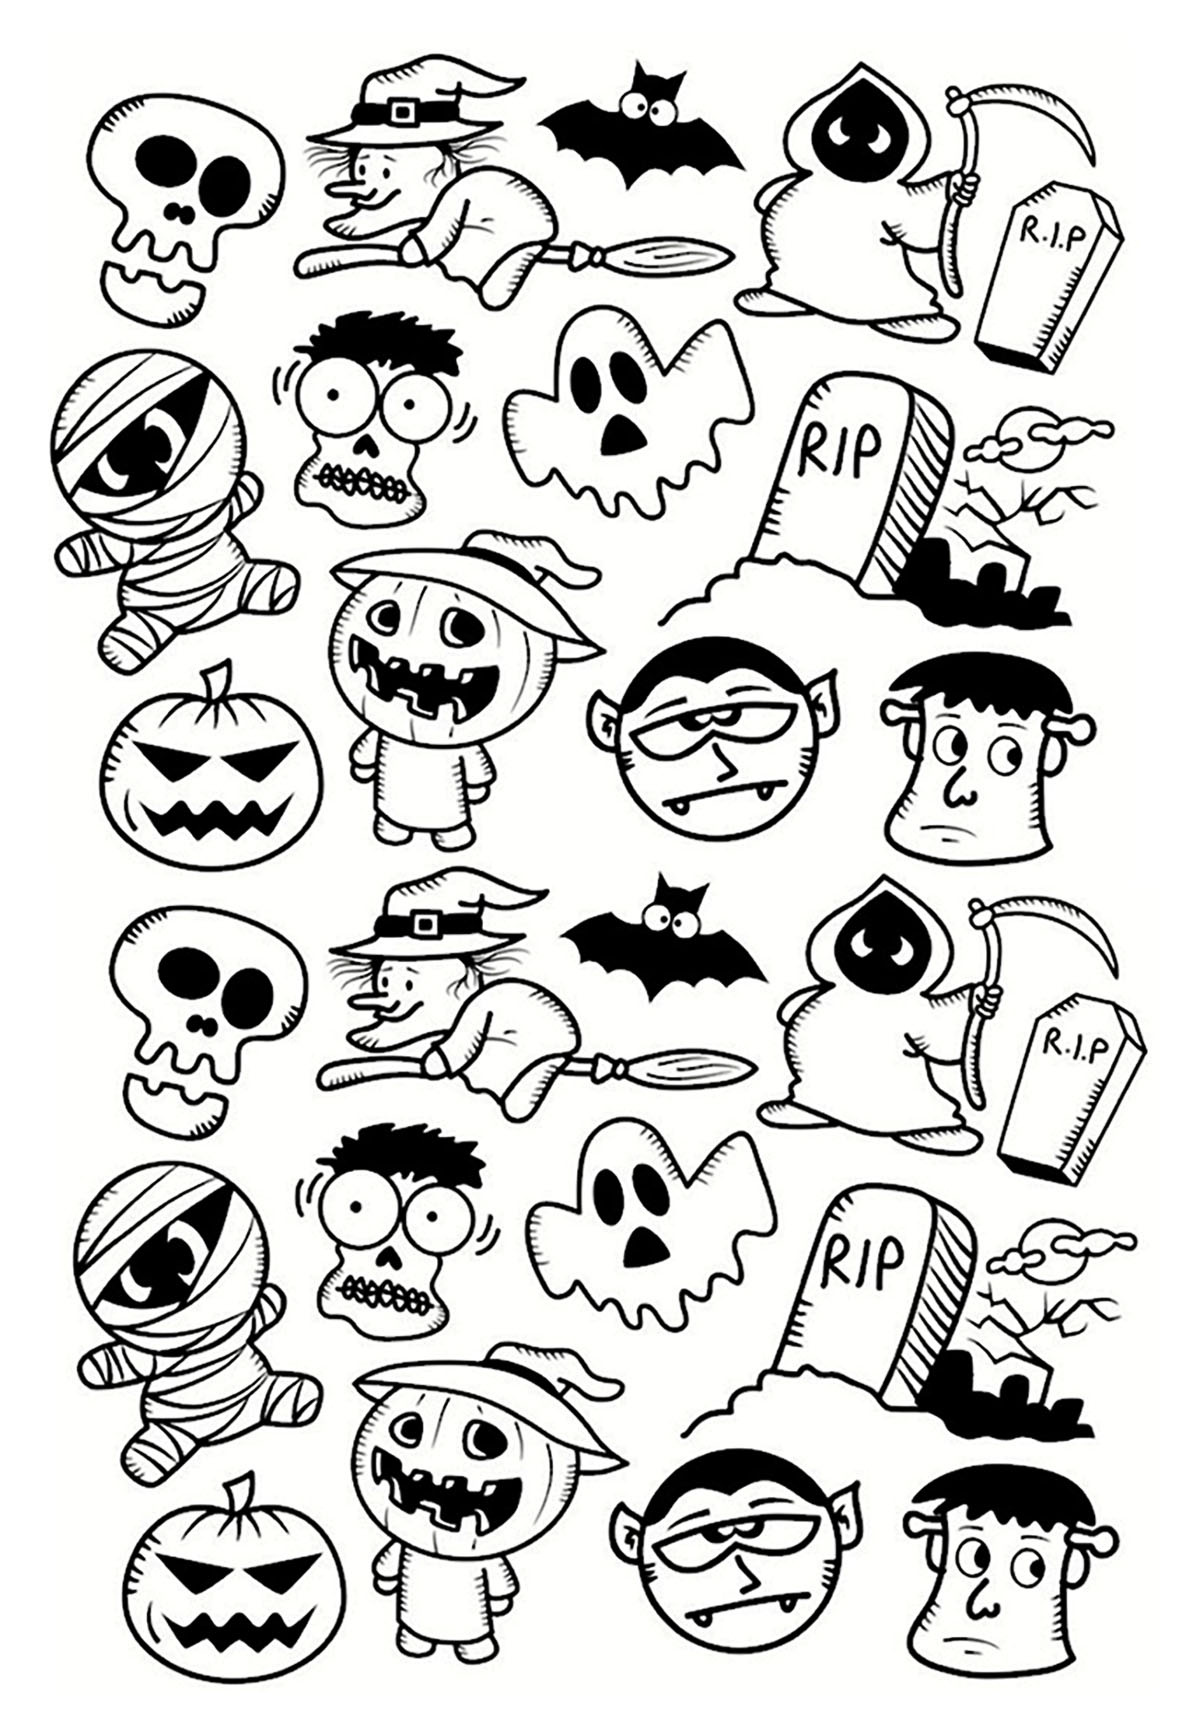 image=coloriages halloween coloriage halloween personnages doodle 1